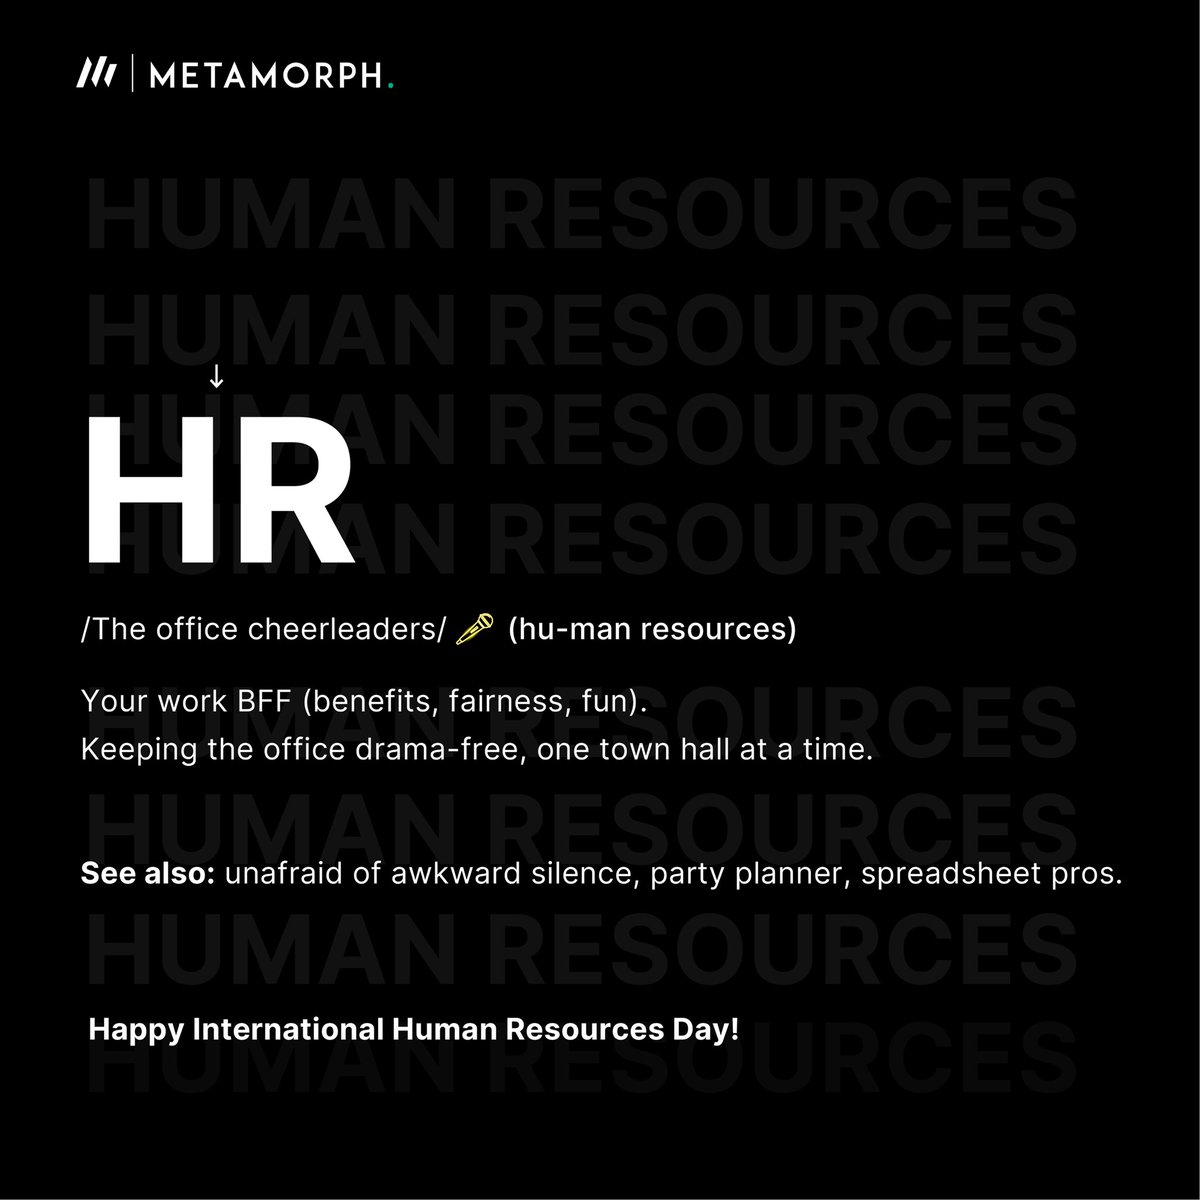 Happy #InternationalHumanResourcesDay from your fellow HR enthusiasts at MetaMorph!

Tag your HR in the comments and let them know it’s their day!

#HR #internationalHRday #humanresources